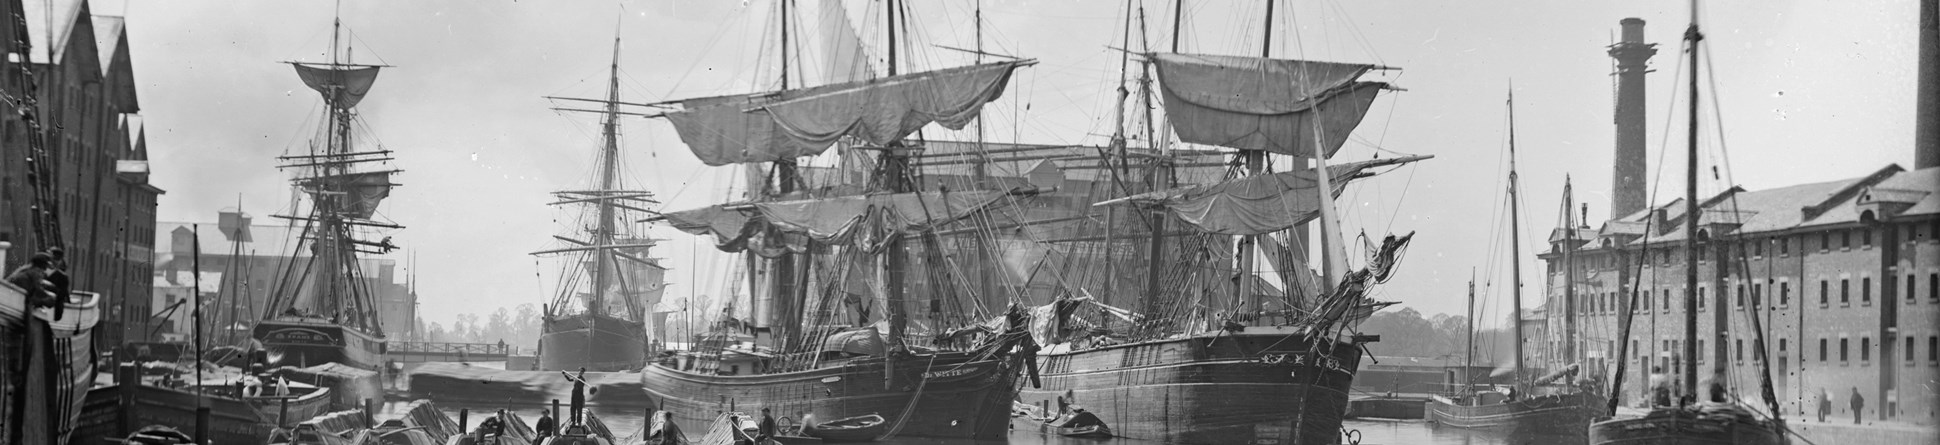 General view showing sailing ships at Gloucester Docks, Gloucester. Date: 1880-1900